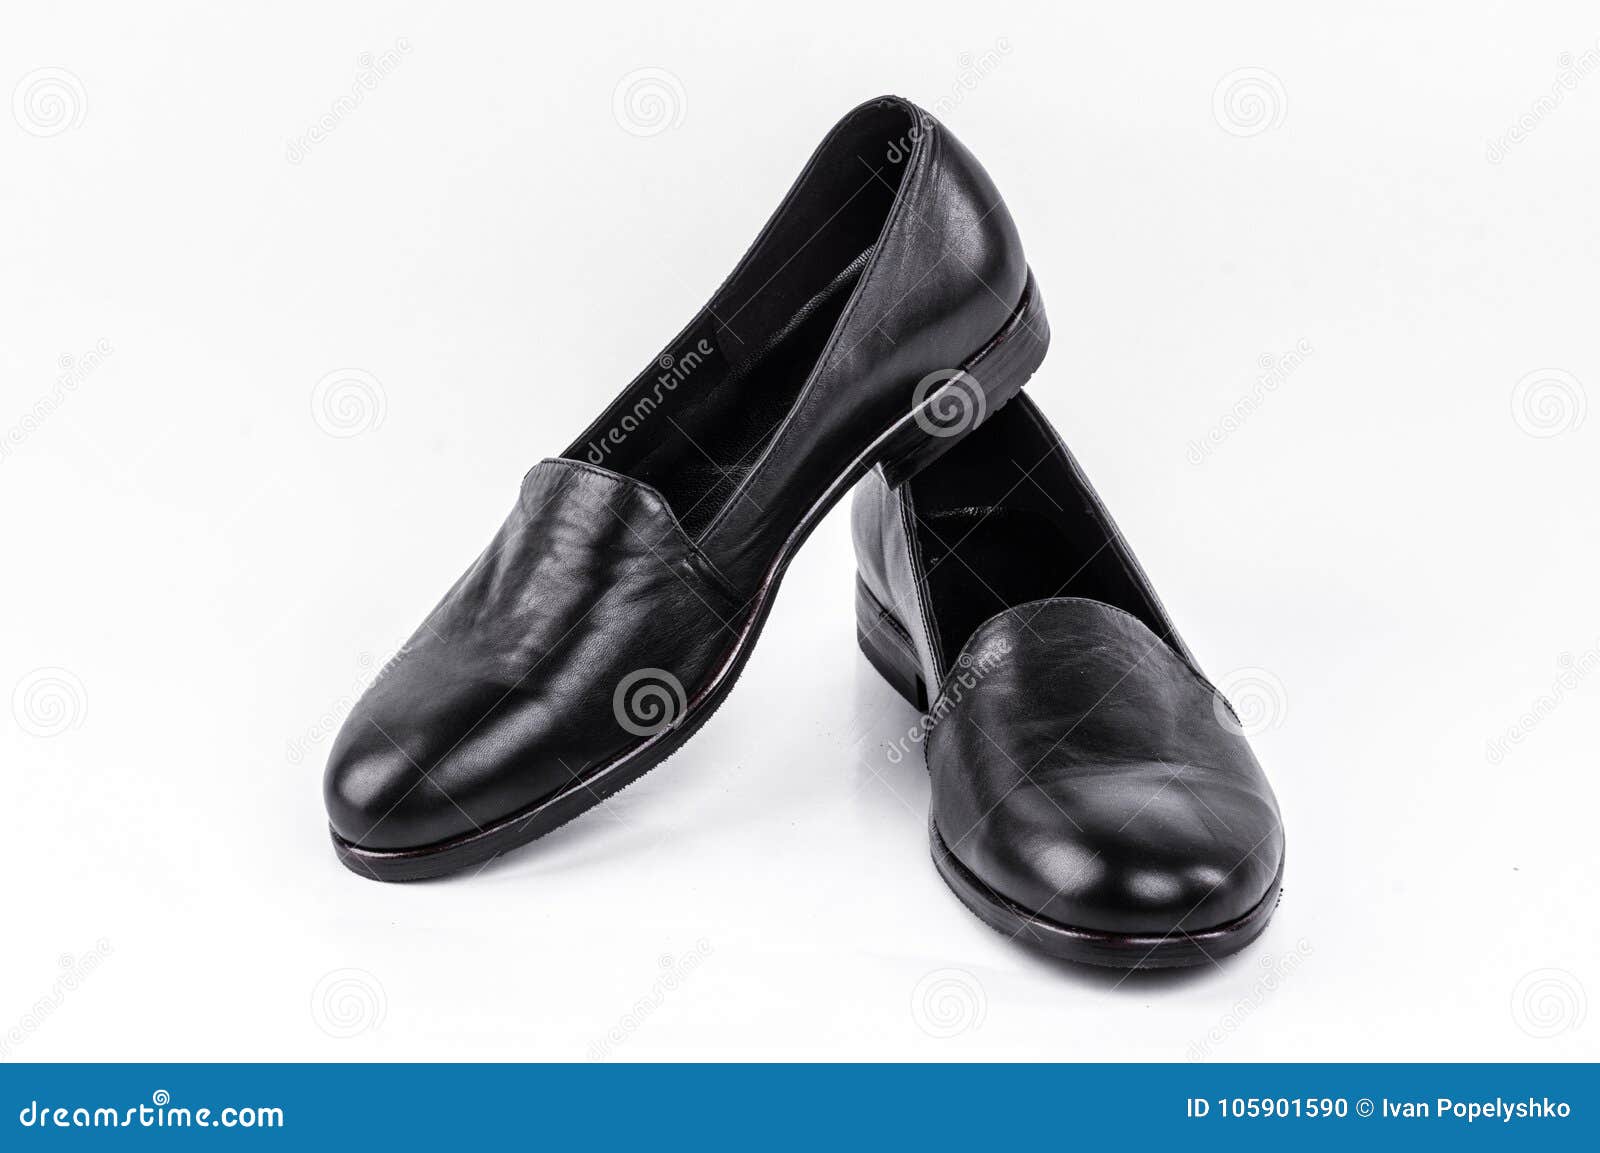 Shoes footwear leather stock photo. Image of shoe, male - 105901590